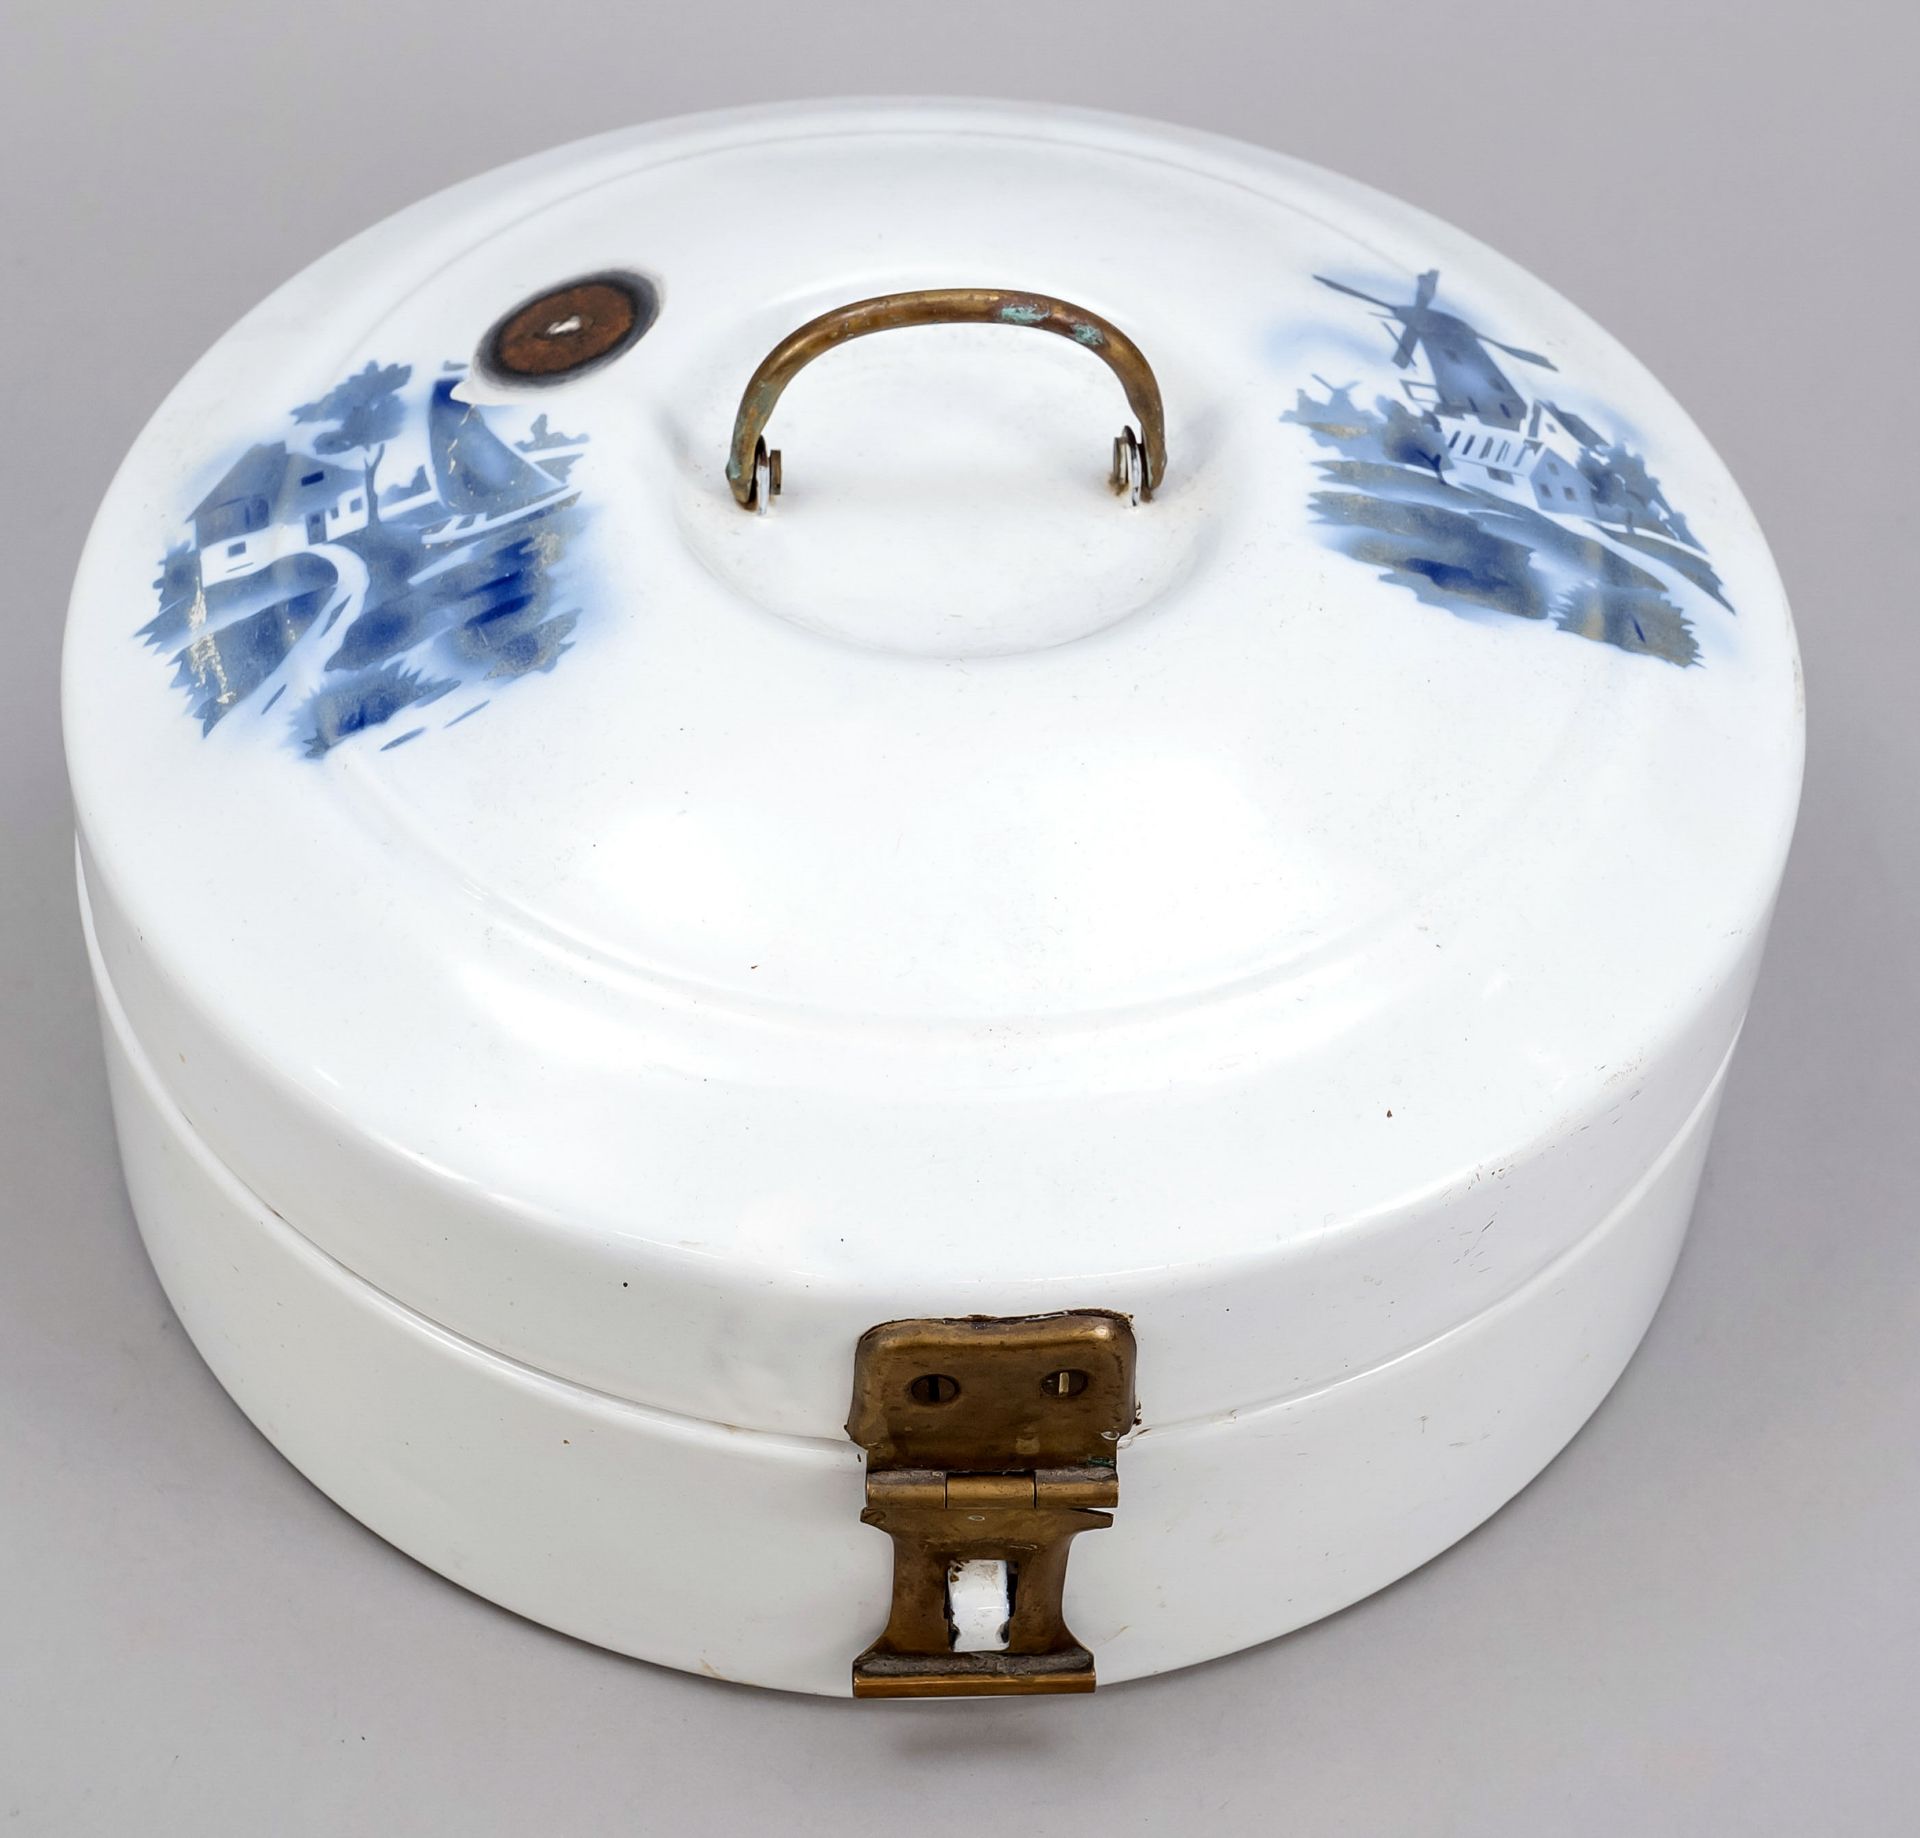 Enamel lunch box Bing brothers, Germany (Nuremberg), 1920s. Round body with hinged lid. Stenciled